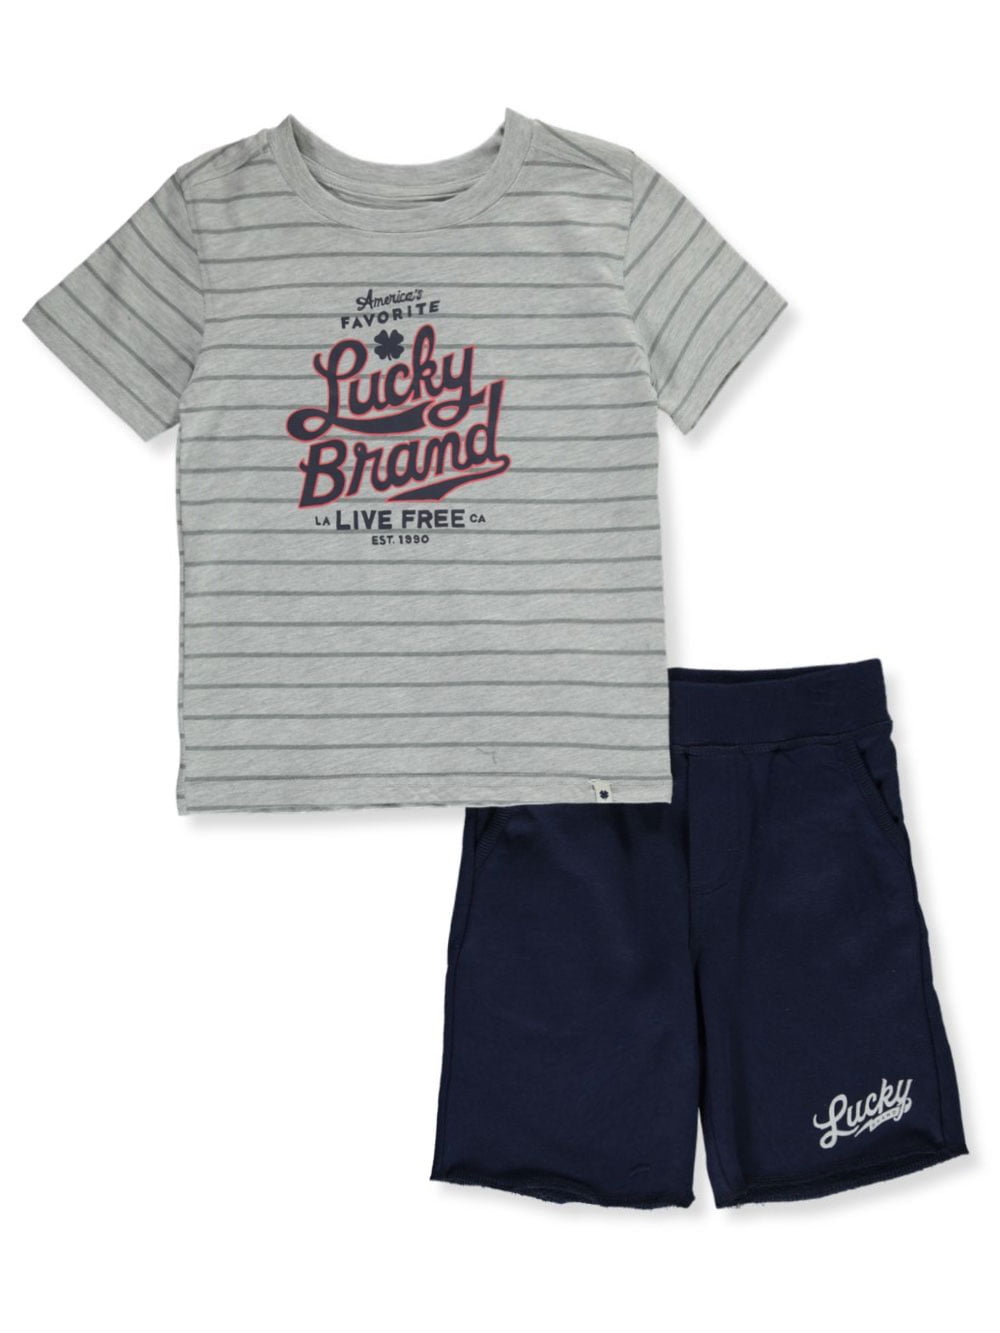 Lucky Brand Boys Oatmeal Top 2pc Short Set Size 2T 3T 4T 4 5 6 7